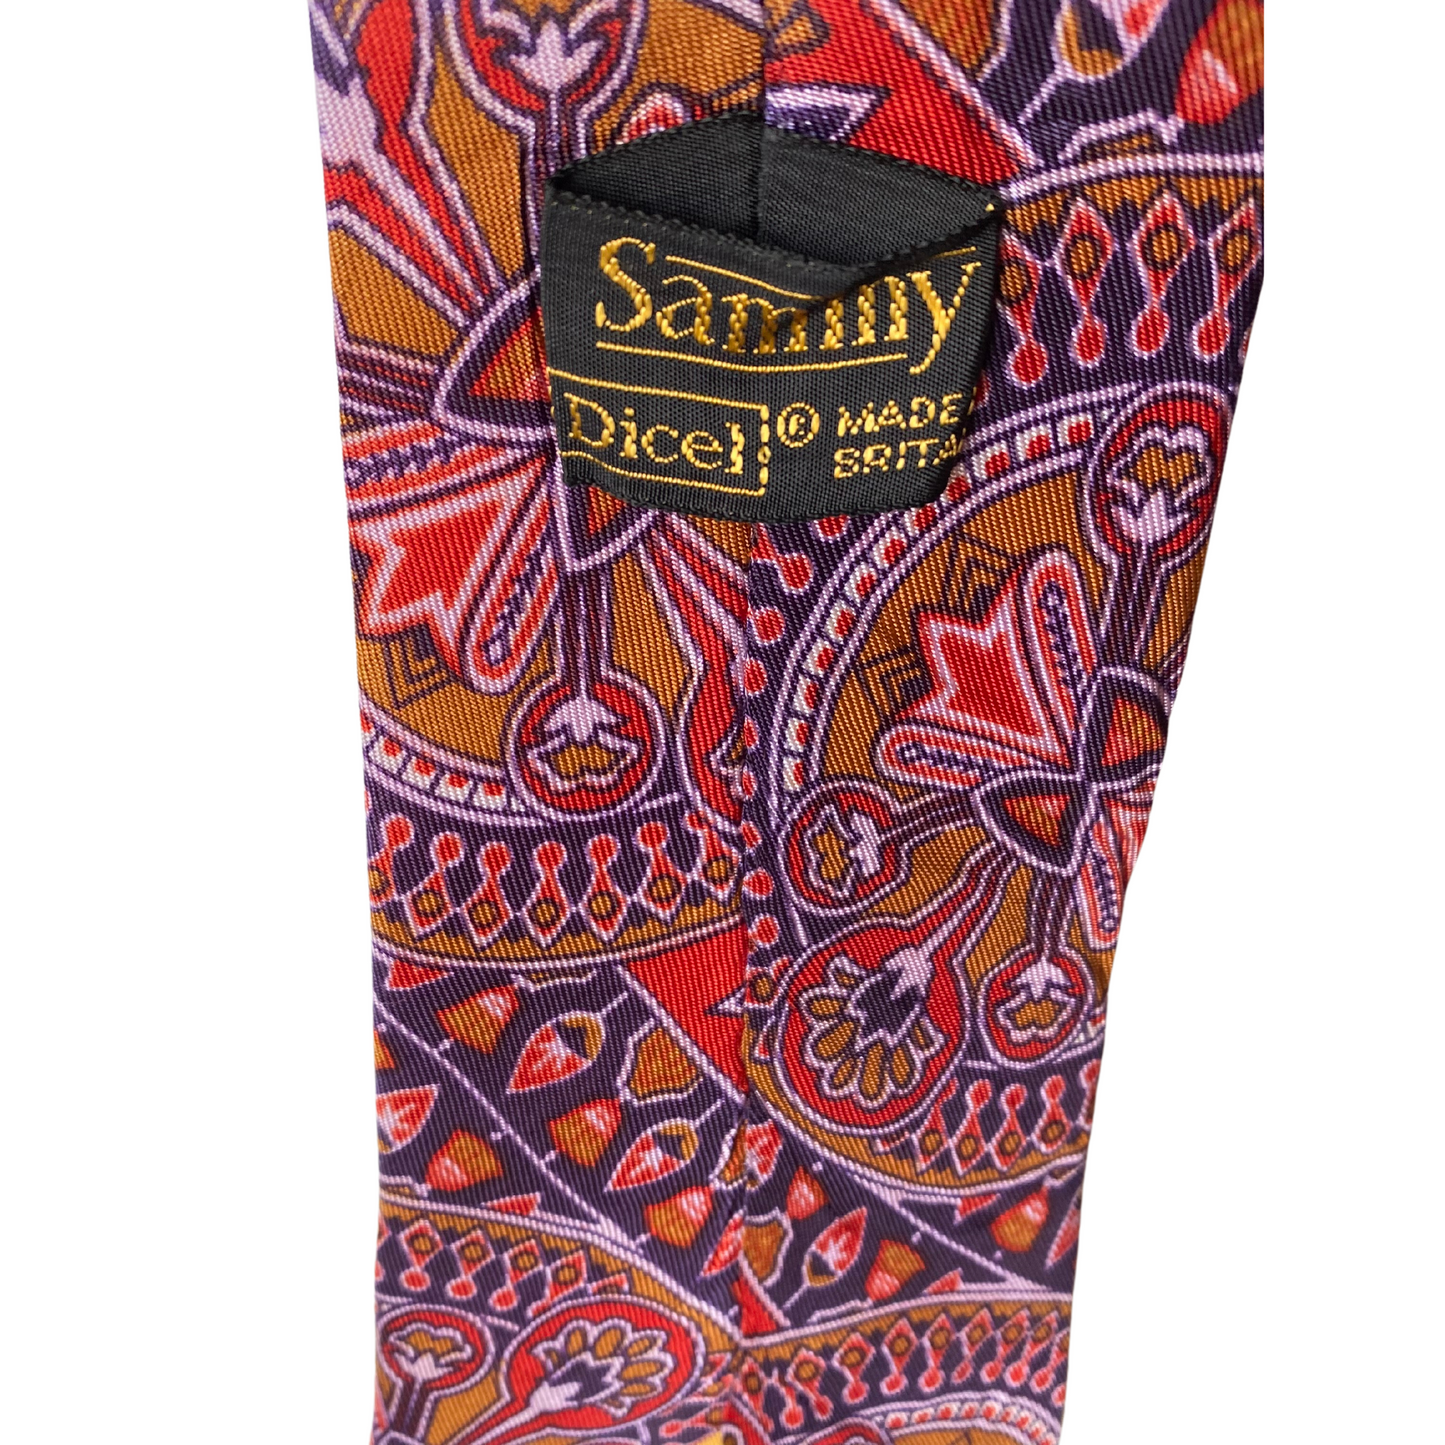 Vintage 60s Mod Style Abstract Paisley Neck Tie. Great with 60s or 70s Shirts